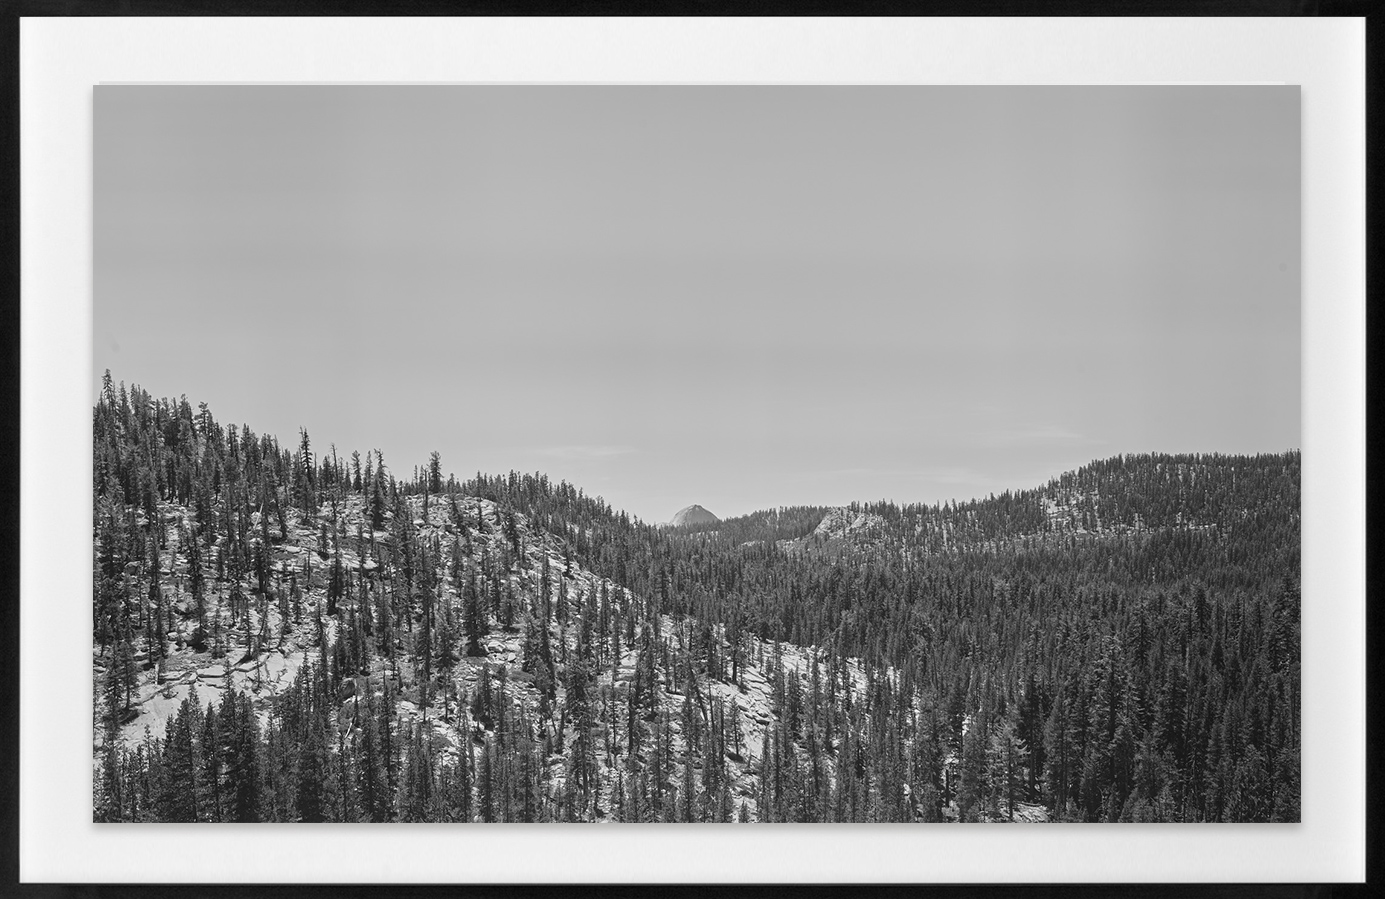 Framed black and white photograph of a rocky hillside covered with pine trees